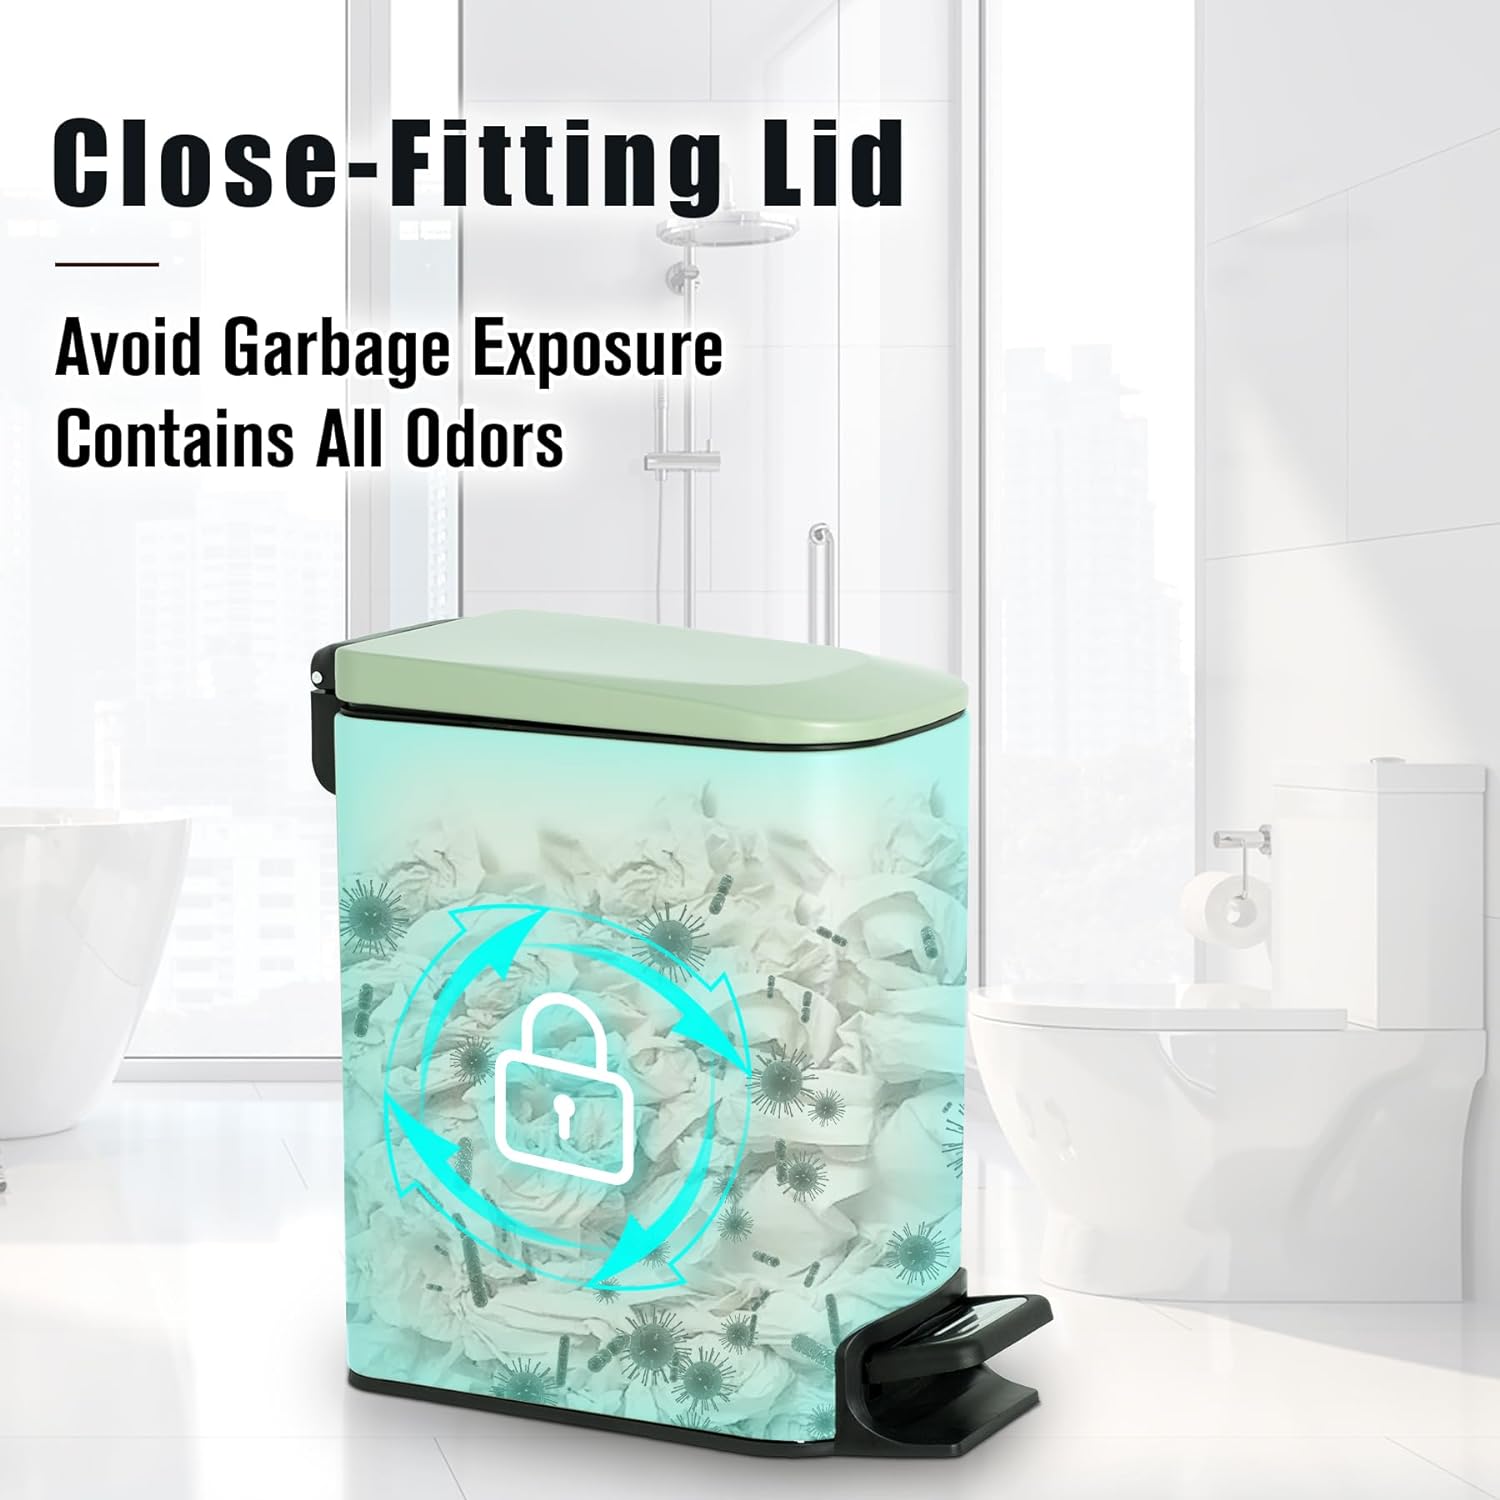 https://bigbigmart.com/wp-content/uploads/2023/10/Cesun-Small-Bathroom-Trash-Can-with-Lid-Soft-Close-Step-Pedal-6-Liter-1.6-Gallon-Stainless-Steel-Garbage-Can-with-Removable-Inner-Bucket-Anti-Fingerprint-Finish-Matt-Green3.jpg